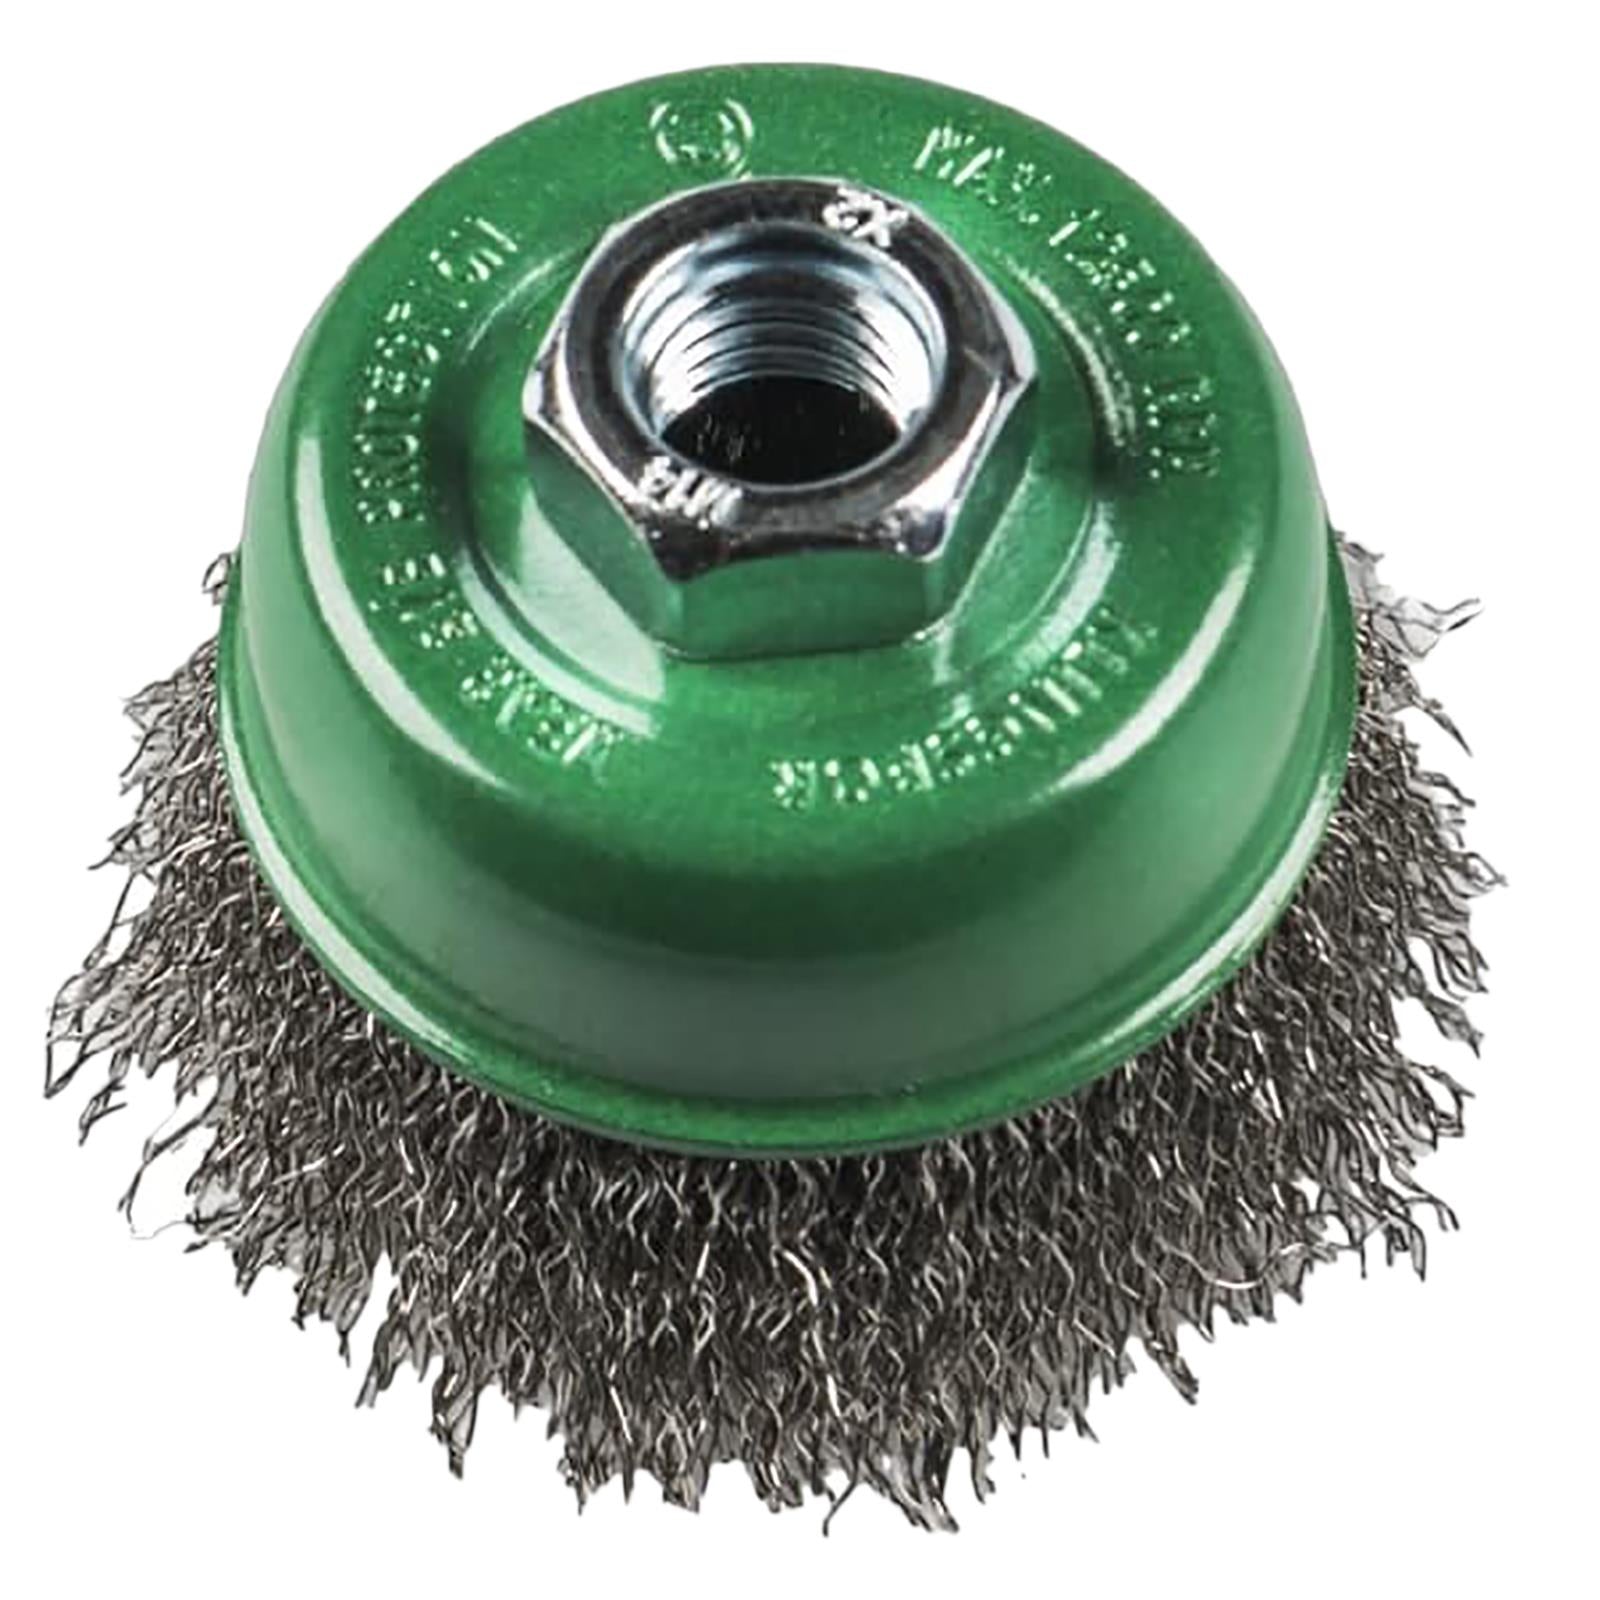 Klingspor Crimped Wire Cup Brush 65mm 80mm M14 Stainless Steel BT600W